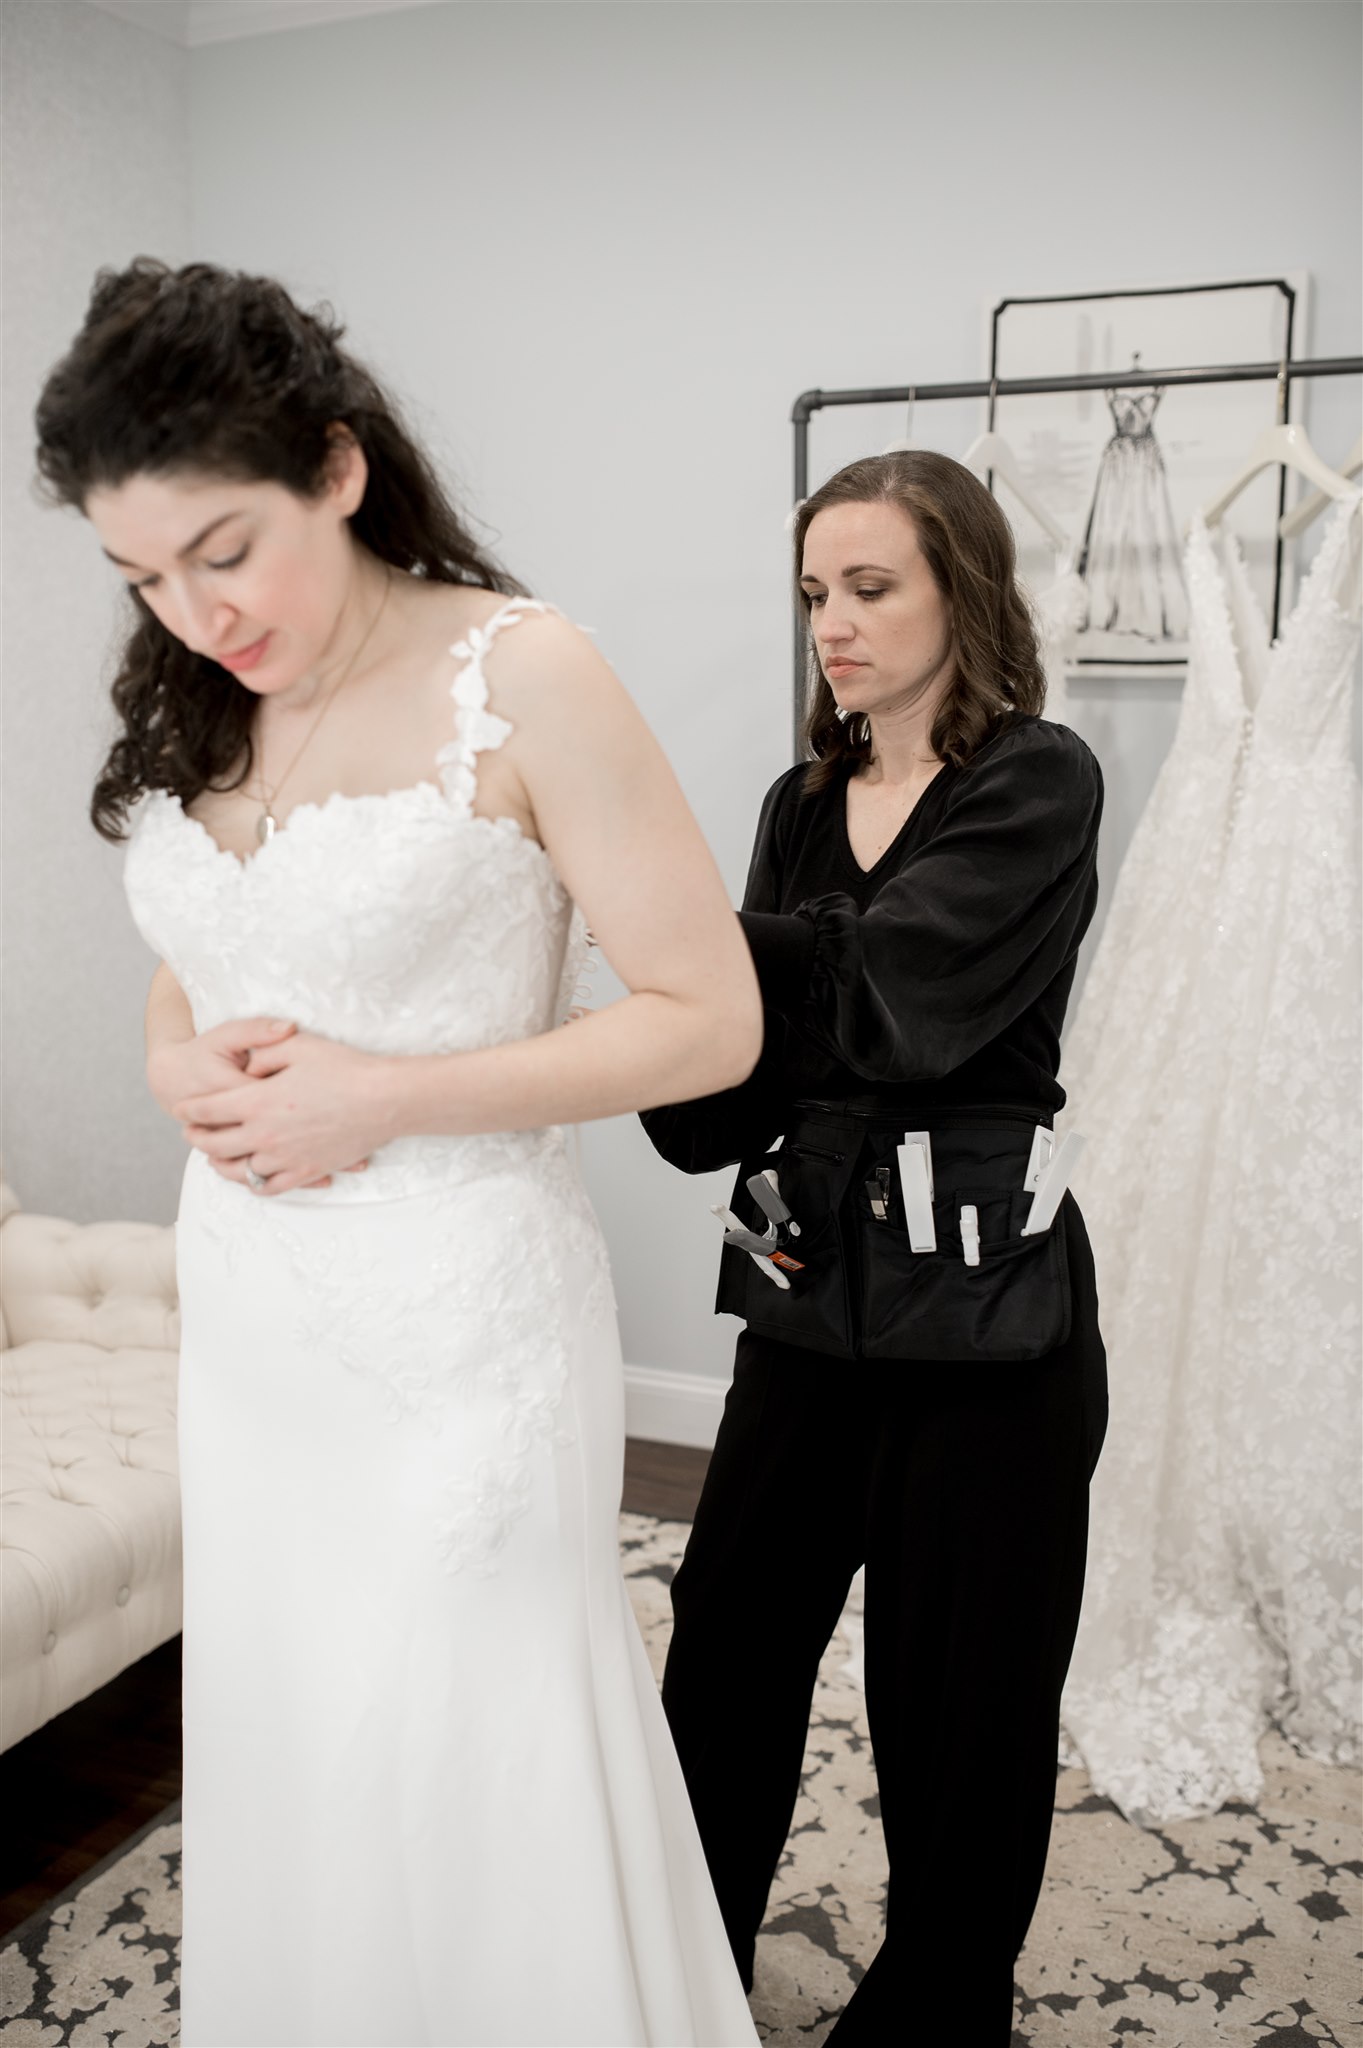 Measurements for Wedding Dress or Party Dress